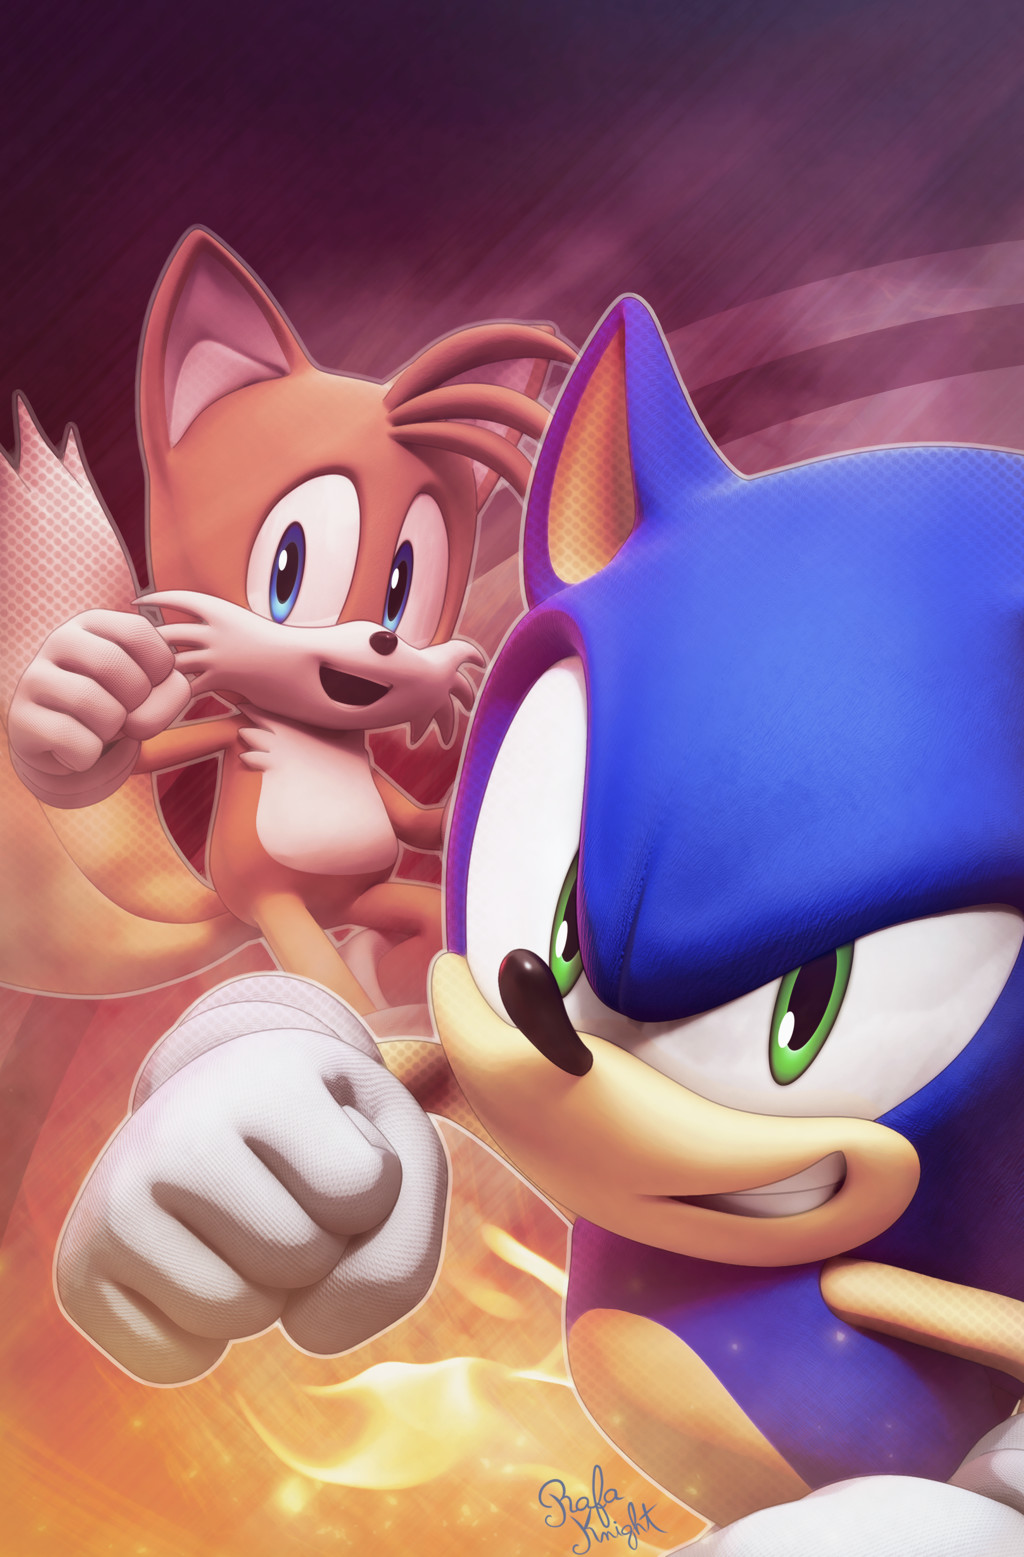 Sonic the Hedgehog on X: Check out the exclusive cover variants